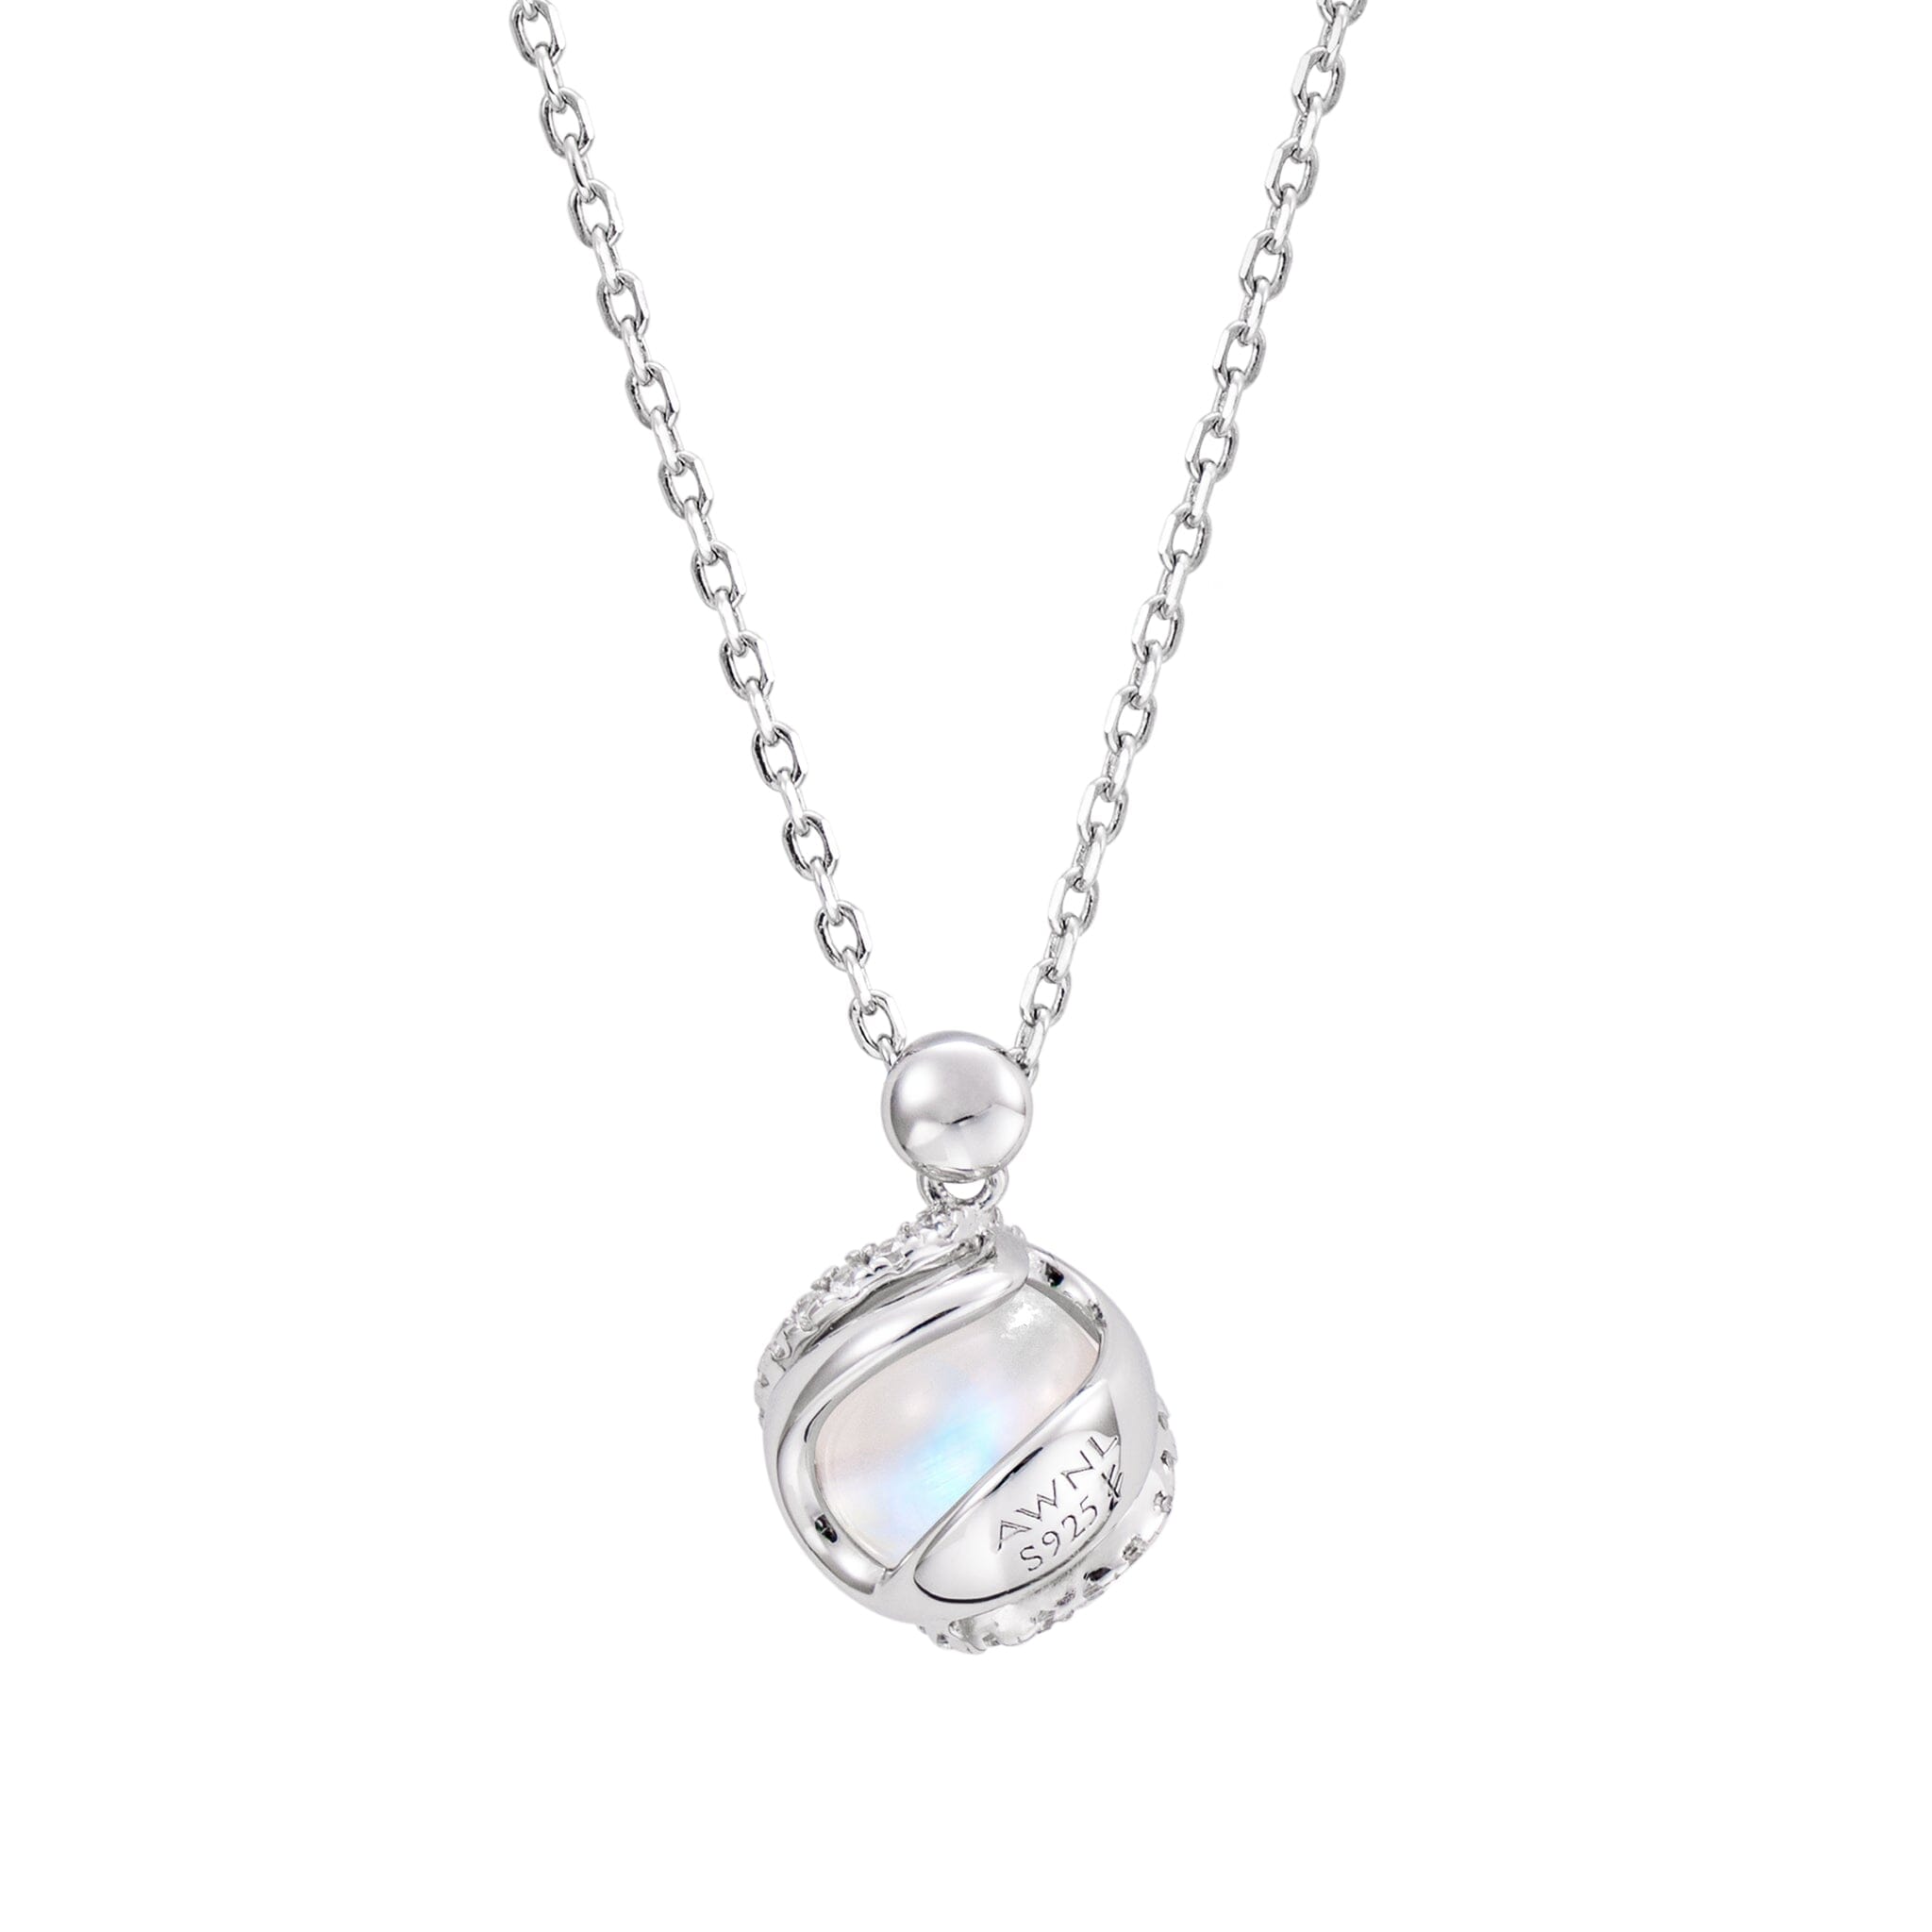 Women's Moving Ball Necklace with Moonstone Necklaces WAA FASHION GROUP Adjustable 